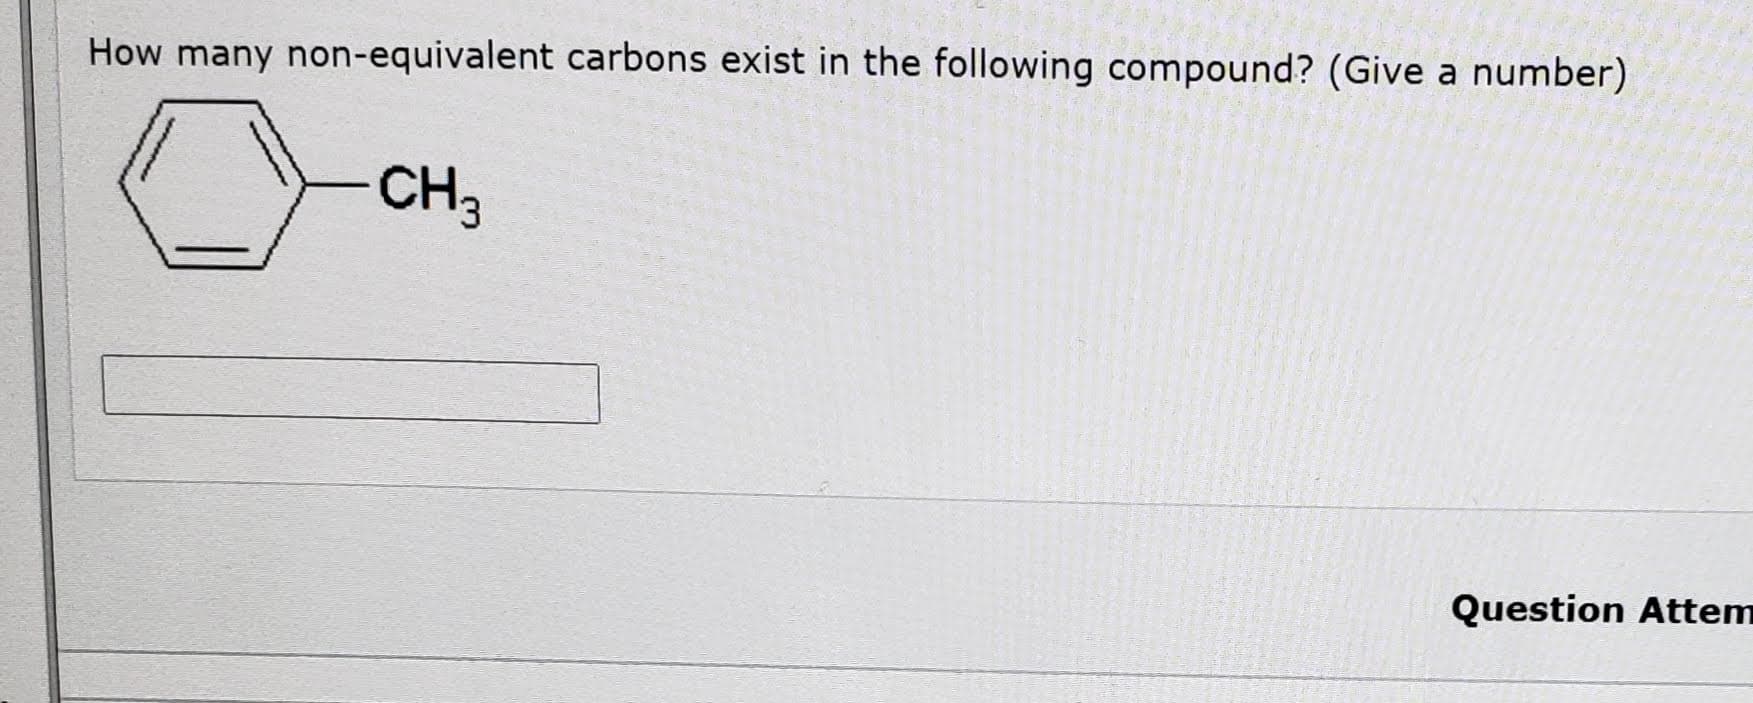 How many non-equivalent carbons exist in the following compound? (Give a number)
CH3
